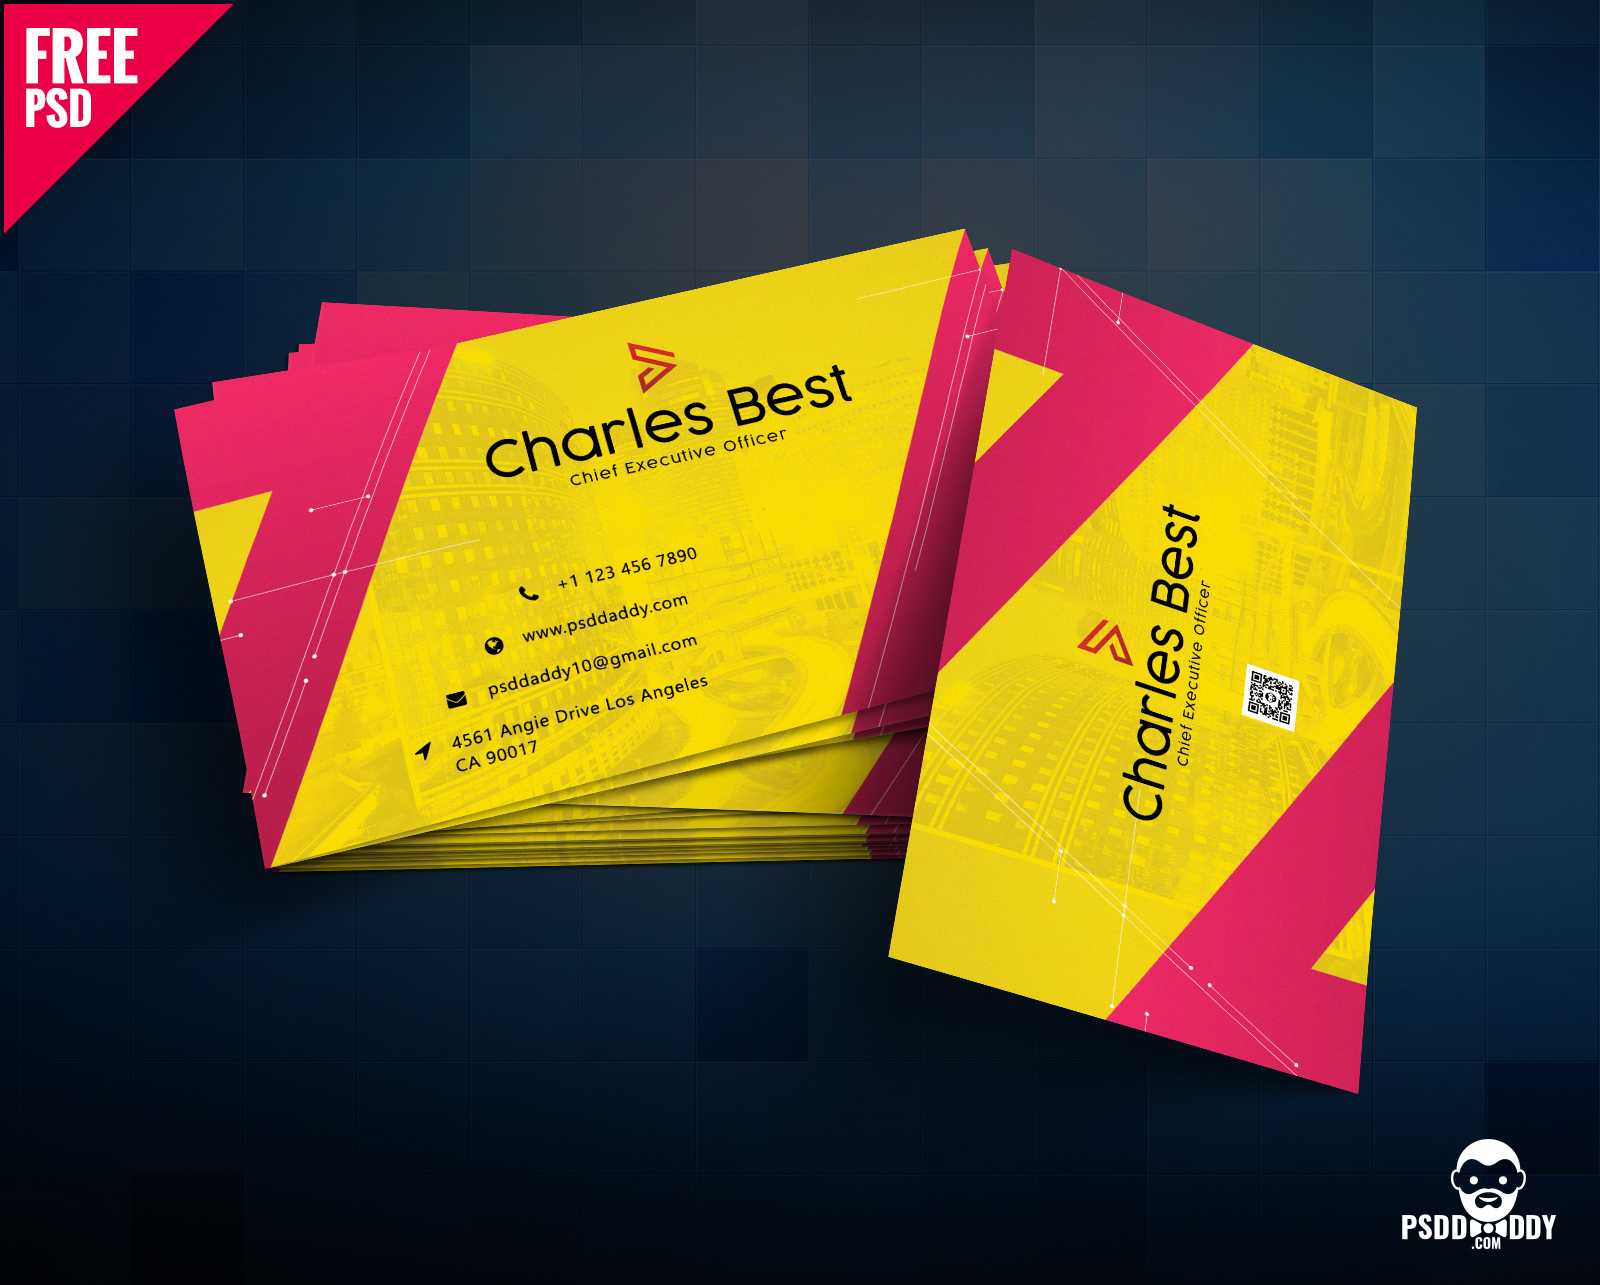 Download] Creative Business Card Free Psd | Psddaddy Pertaining To Calling Card Template Psd